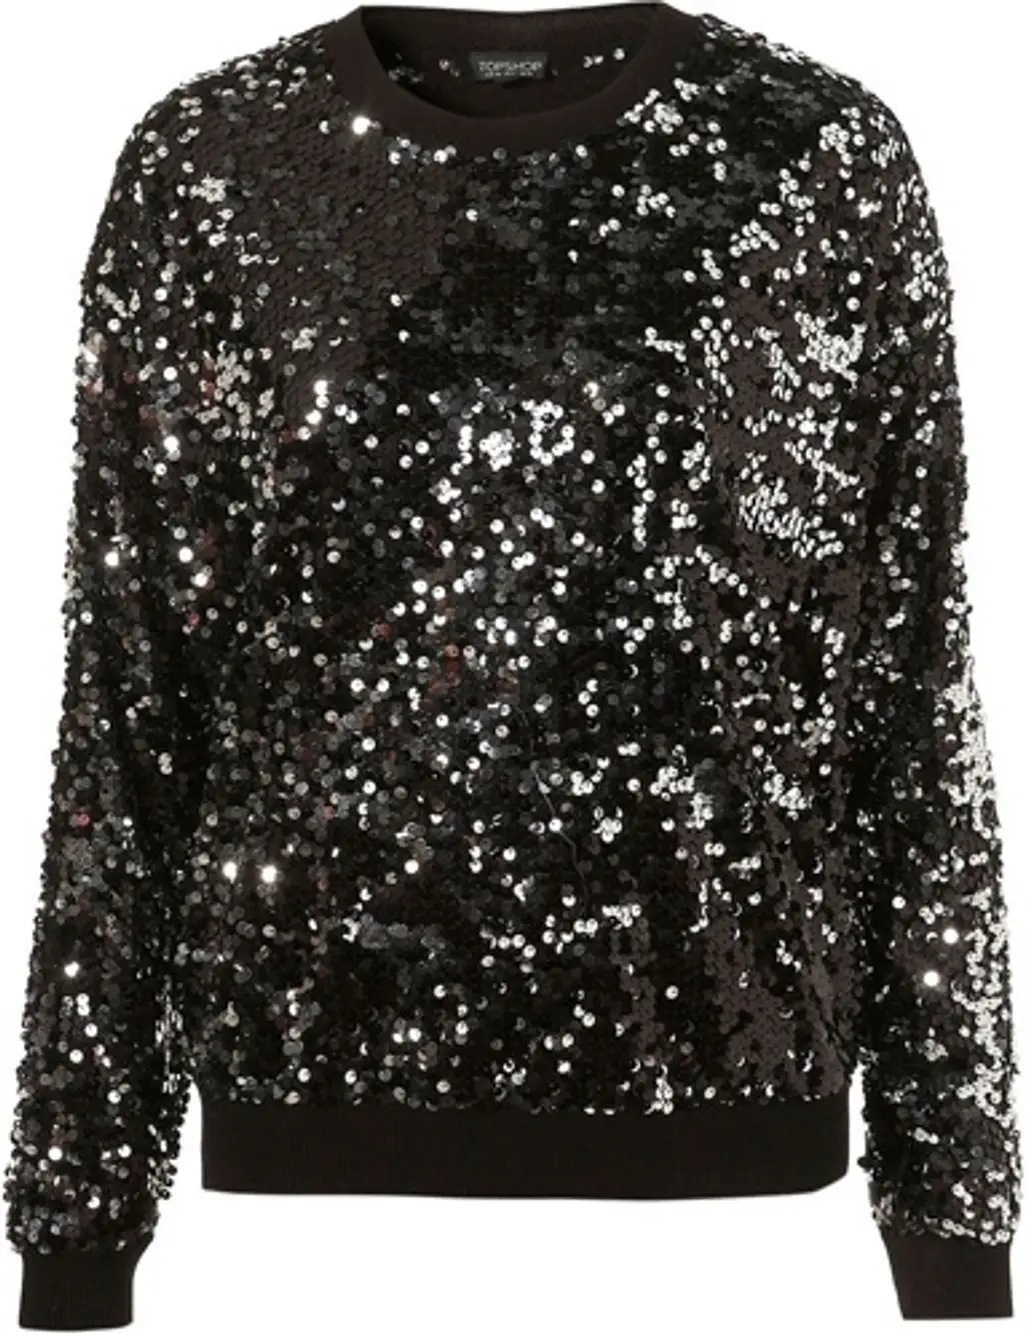 Topshop Knitted Sequin Sweater